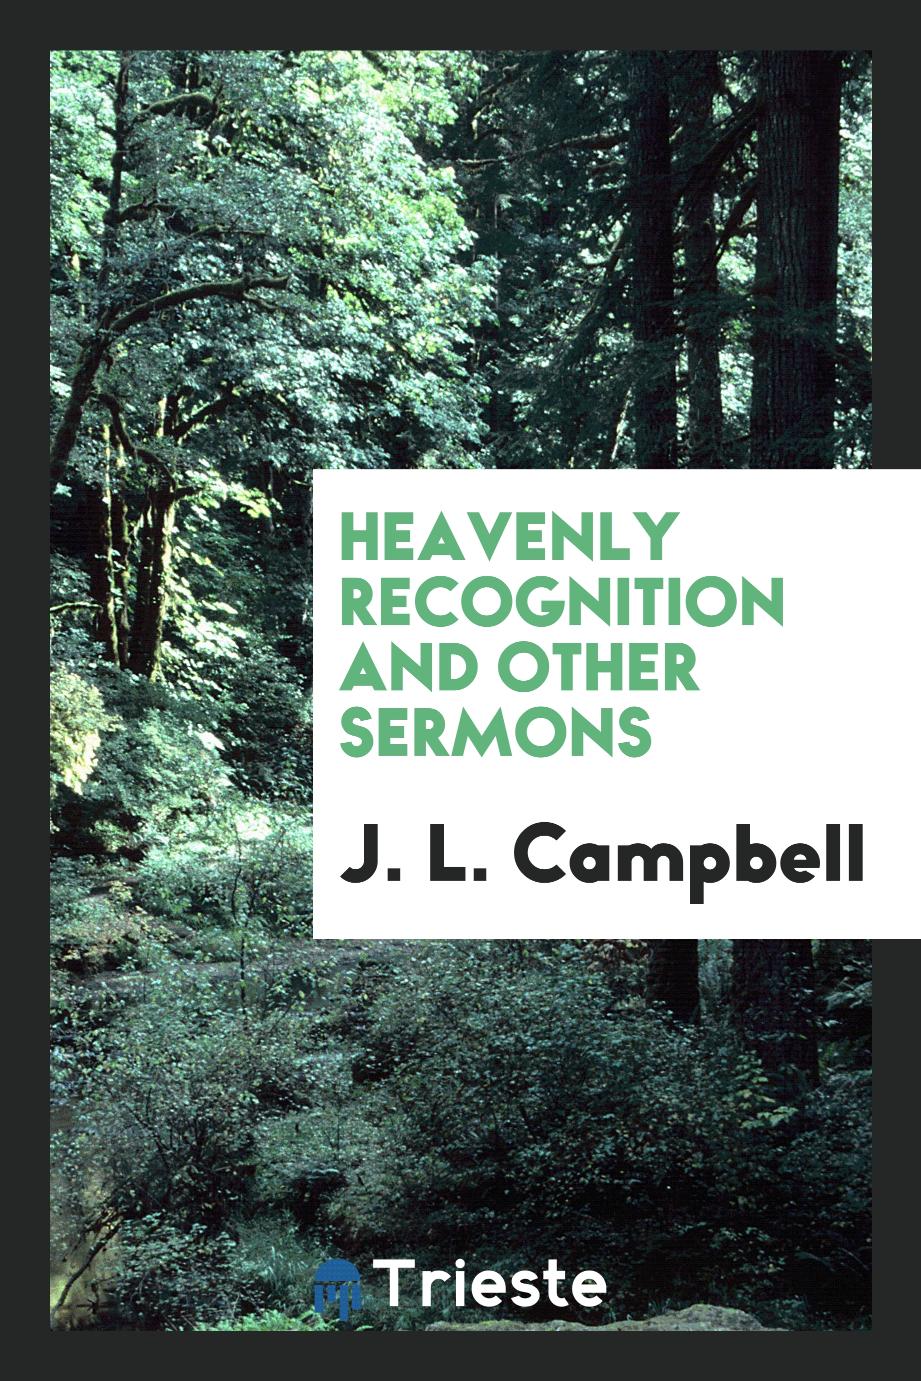 Heavenly recognition and other sermons